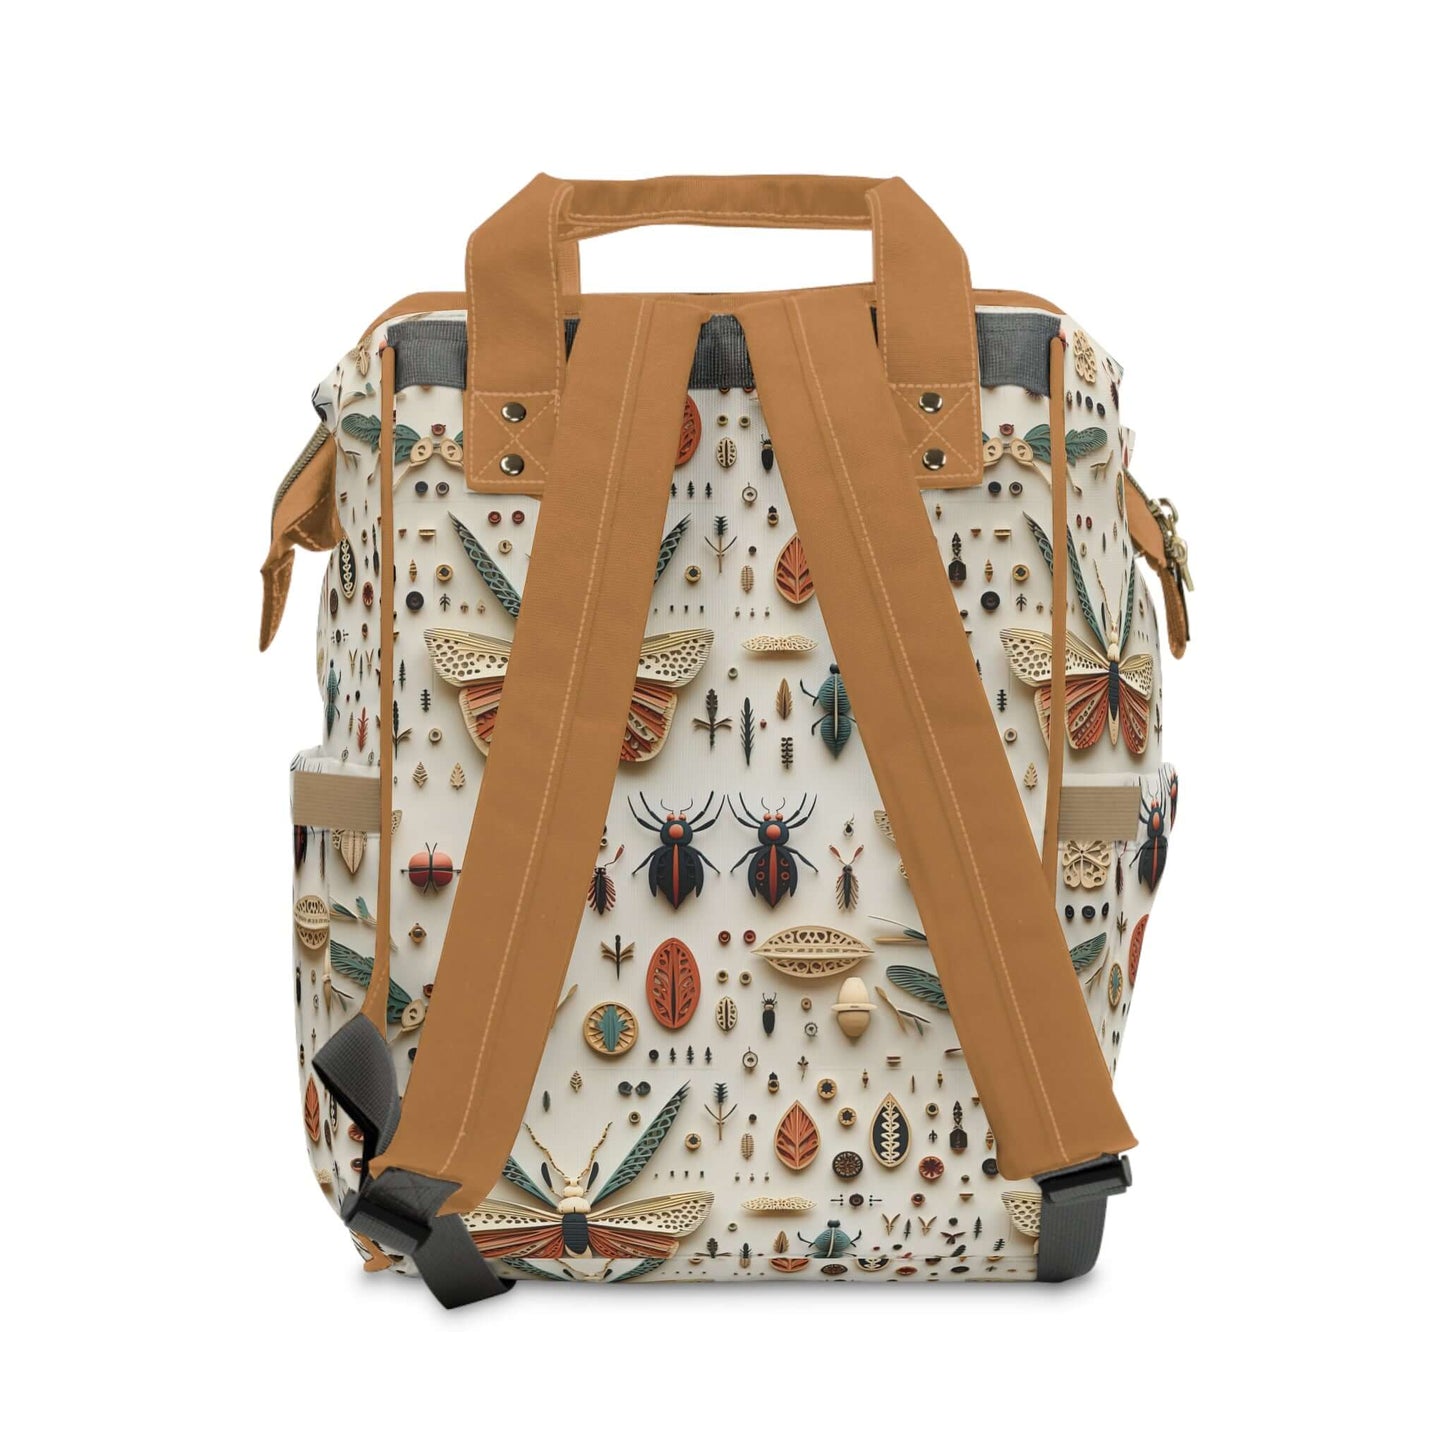 Bugs and Kisses Multifunctional Diaper Backpack-Brown straps All Bags 59 WrenIvyCo